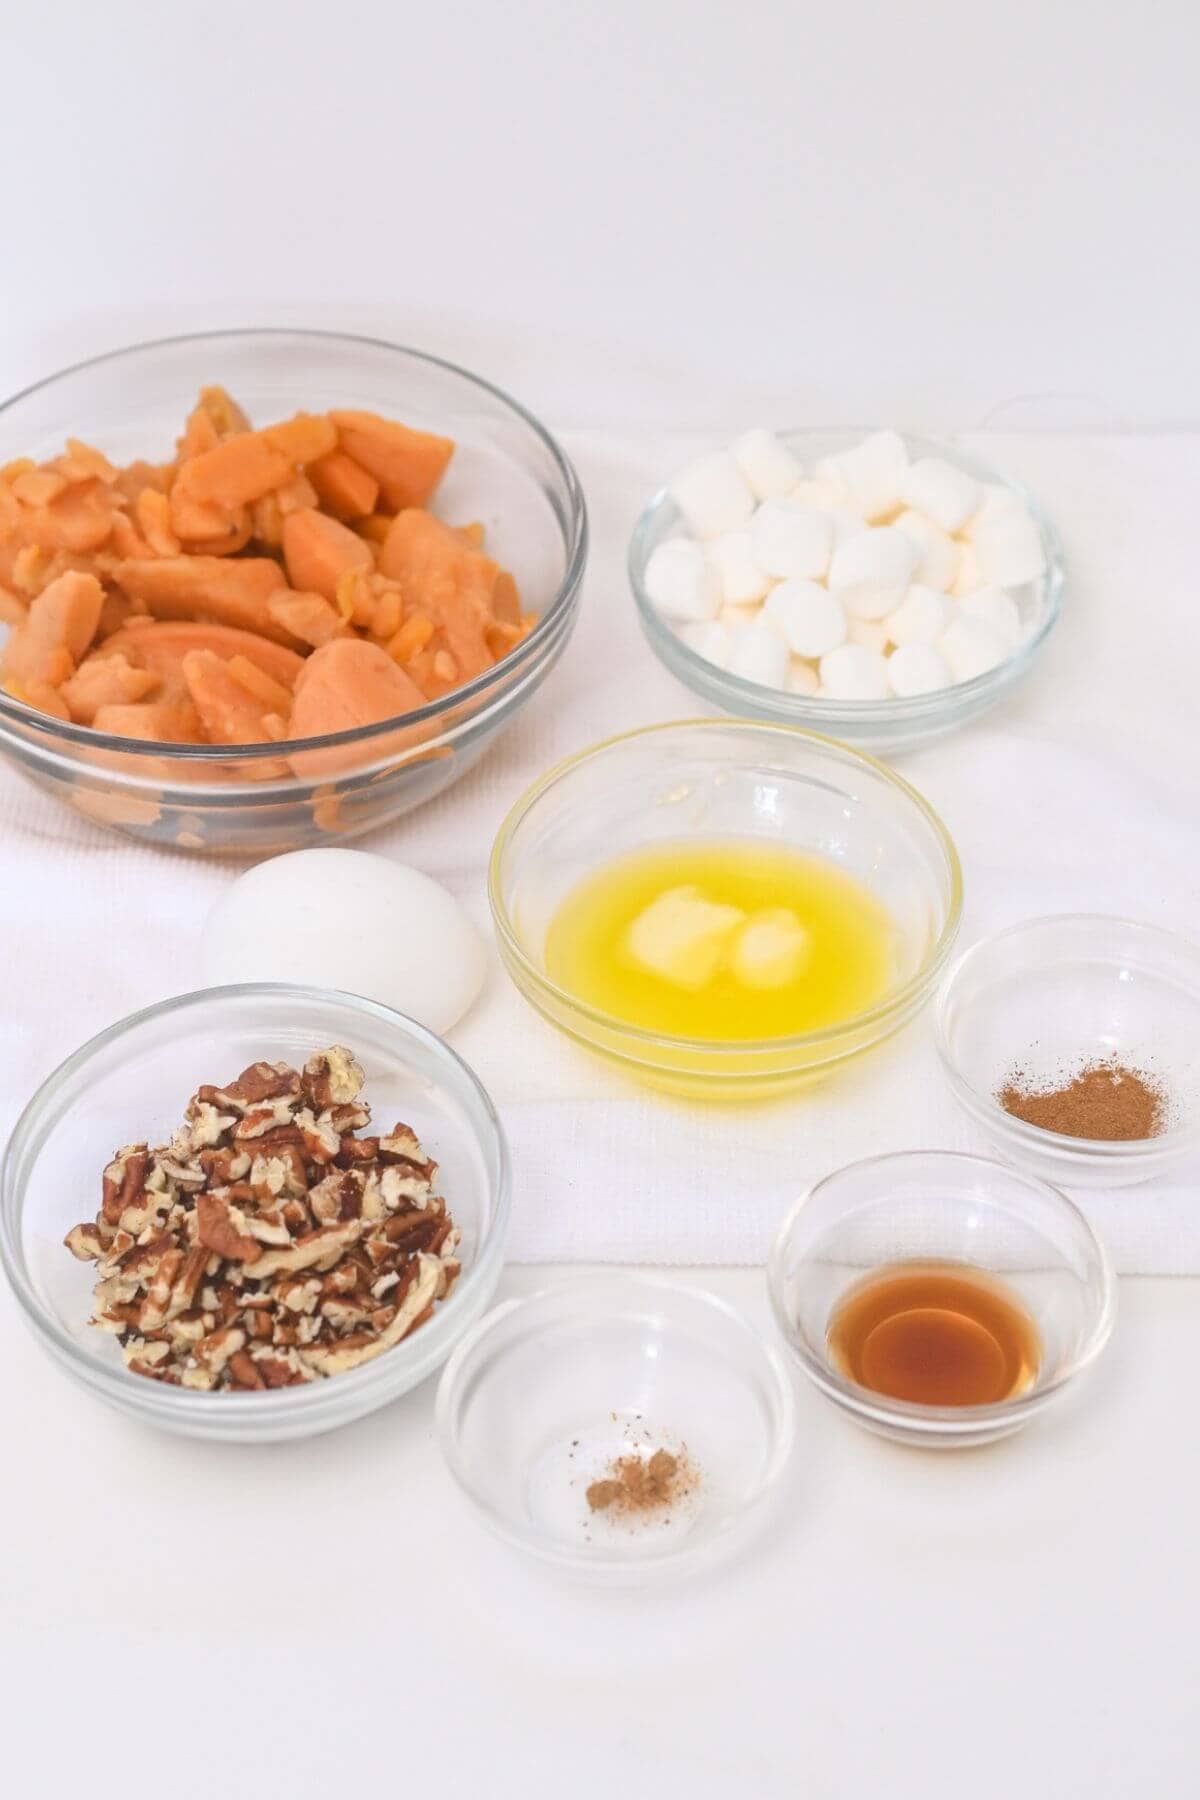 A tabletop with sweet potato casserole ingredients.